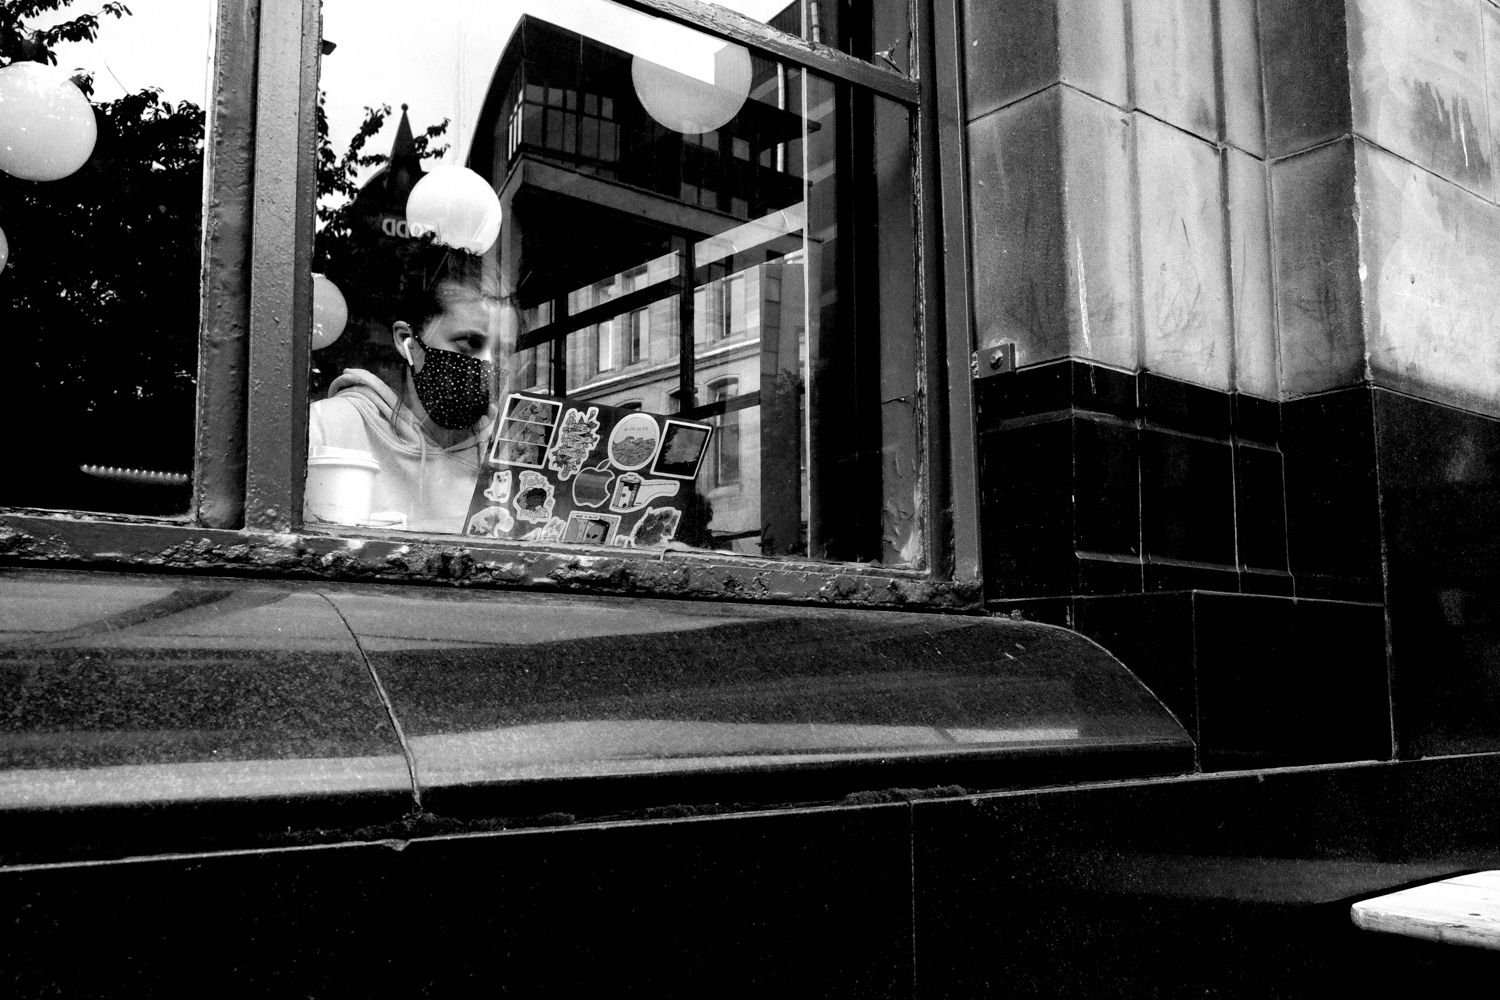 Coffee shop working with reflections